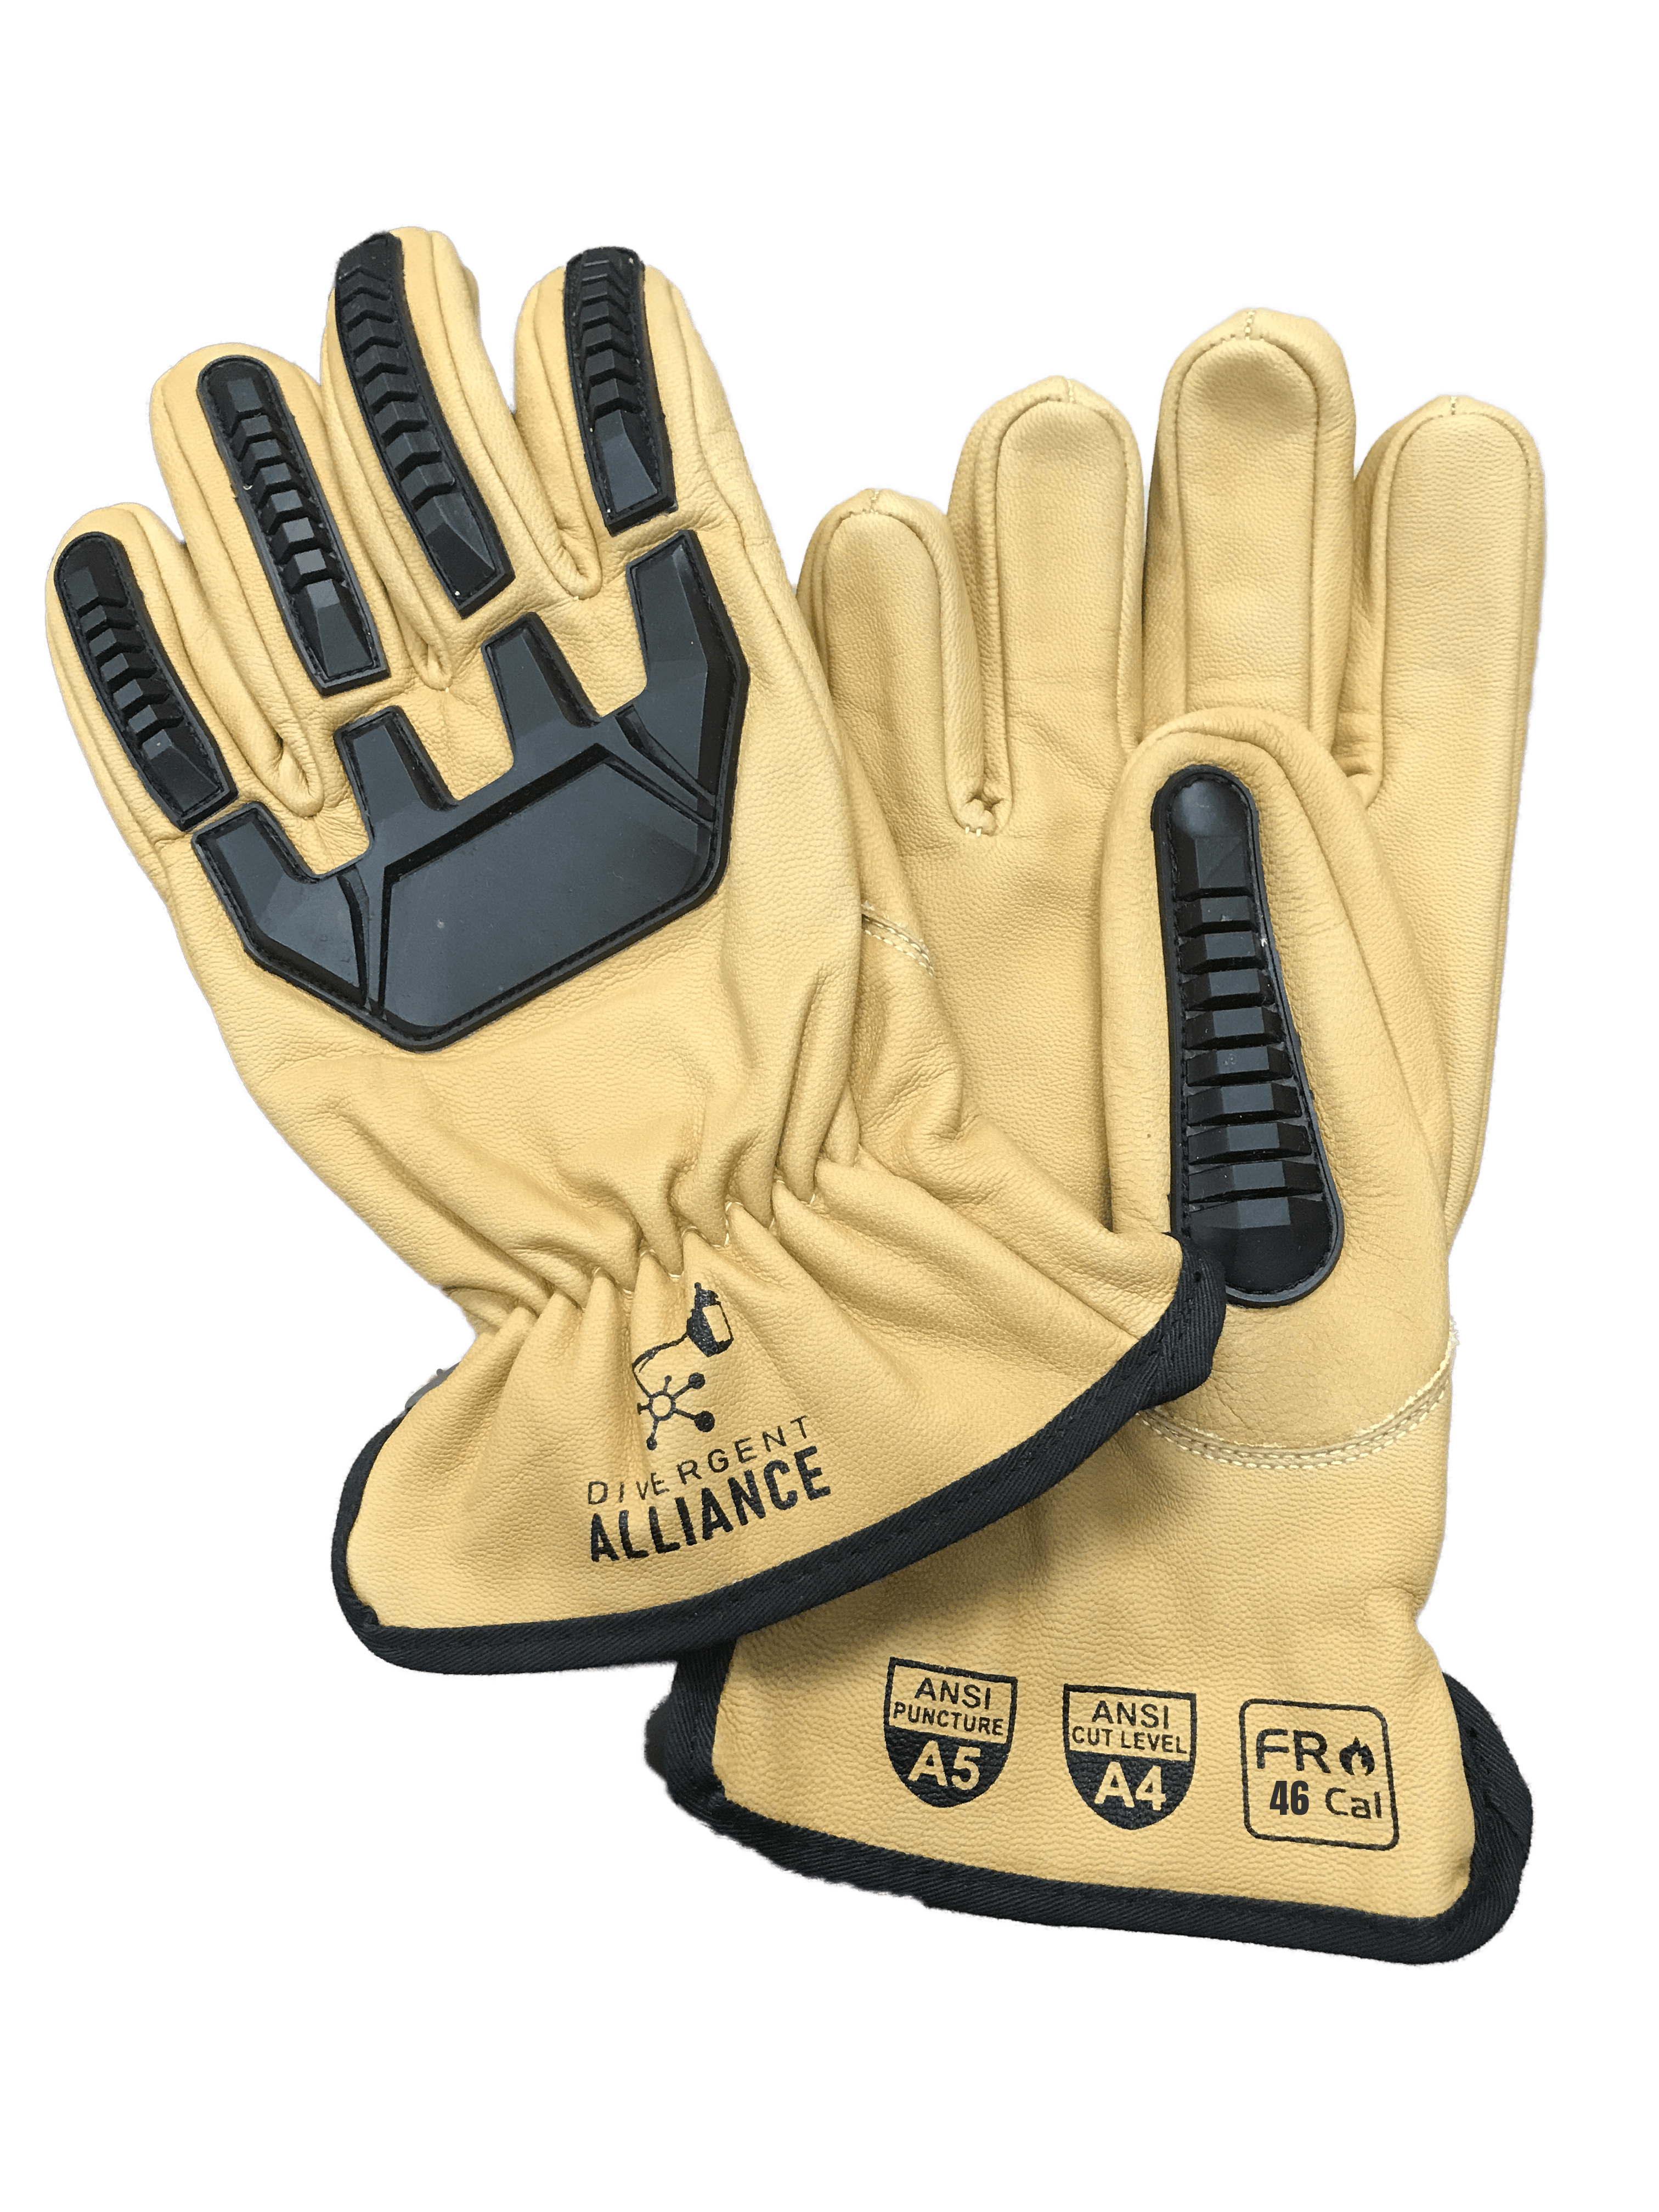 Work Gloves Supplier | Leather Gloves, Cut Resistant, Water Resistant